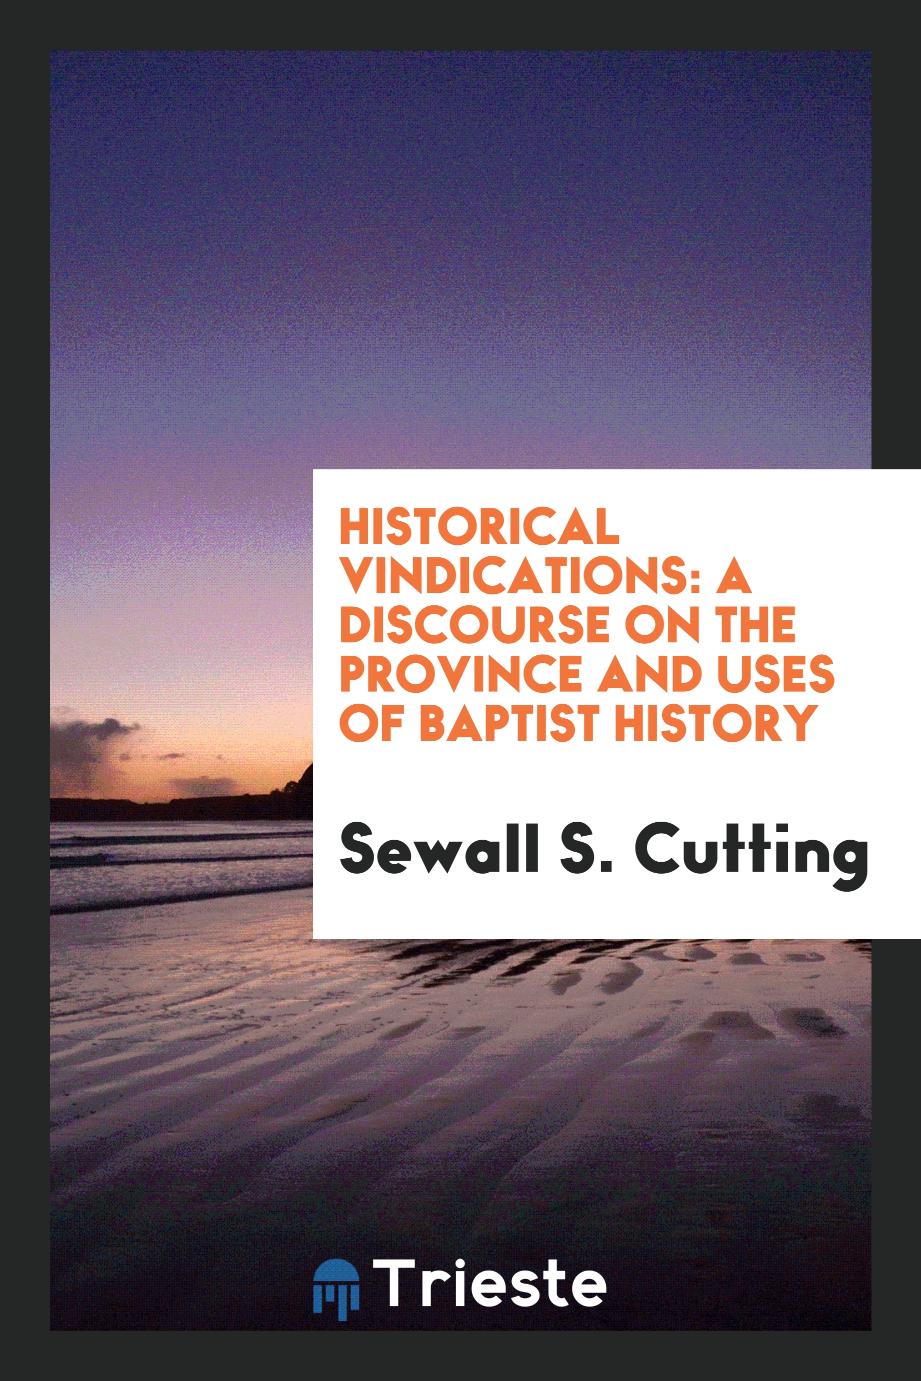 Historical Vindications: A Discourse on the Province and Uses of Baptist History